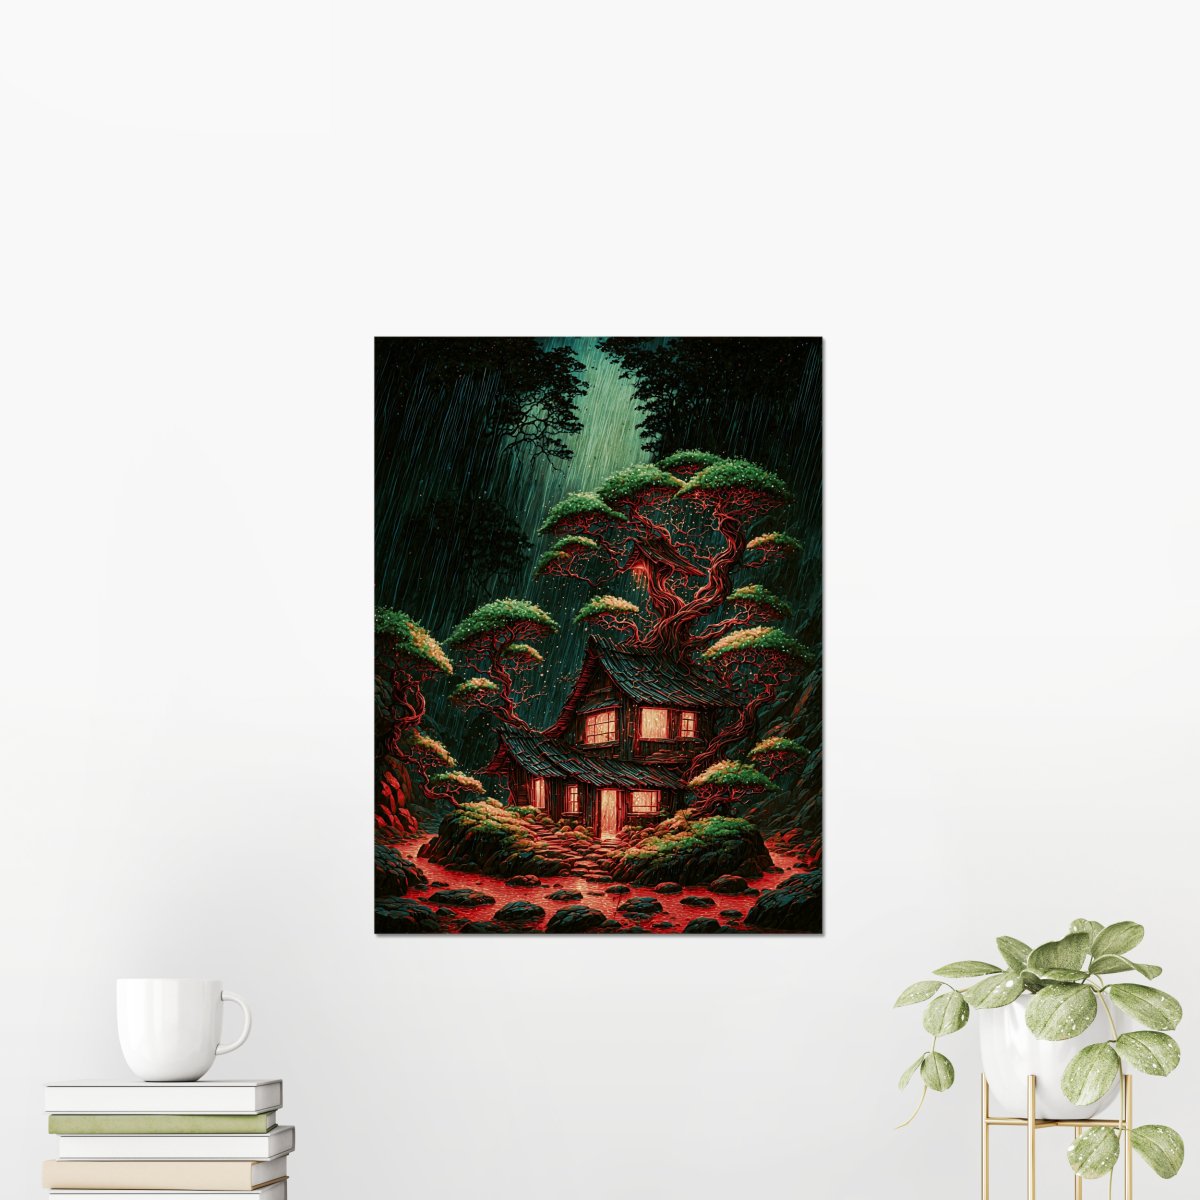 Overgrown brood - Art print - Poster - Ever colorful